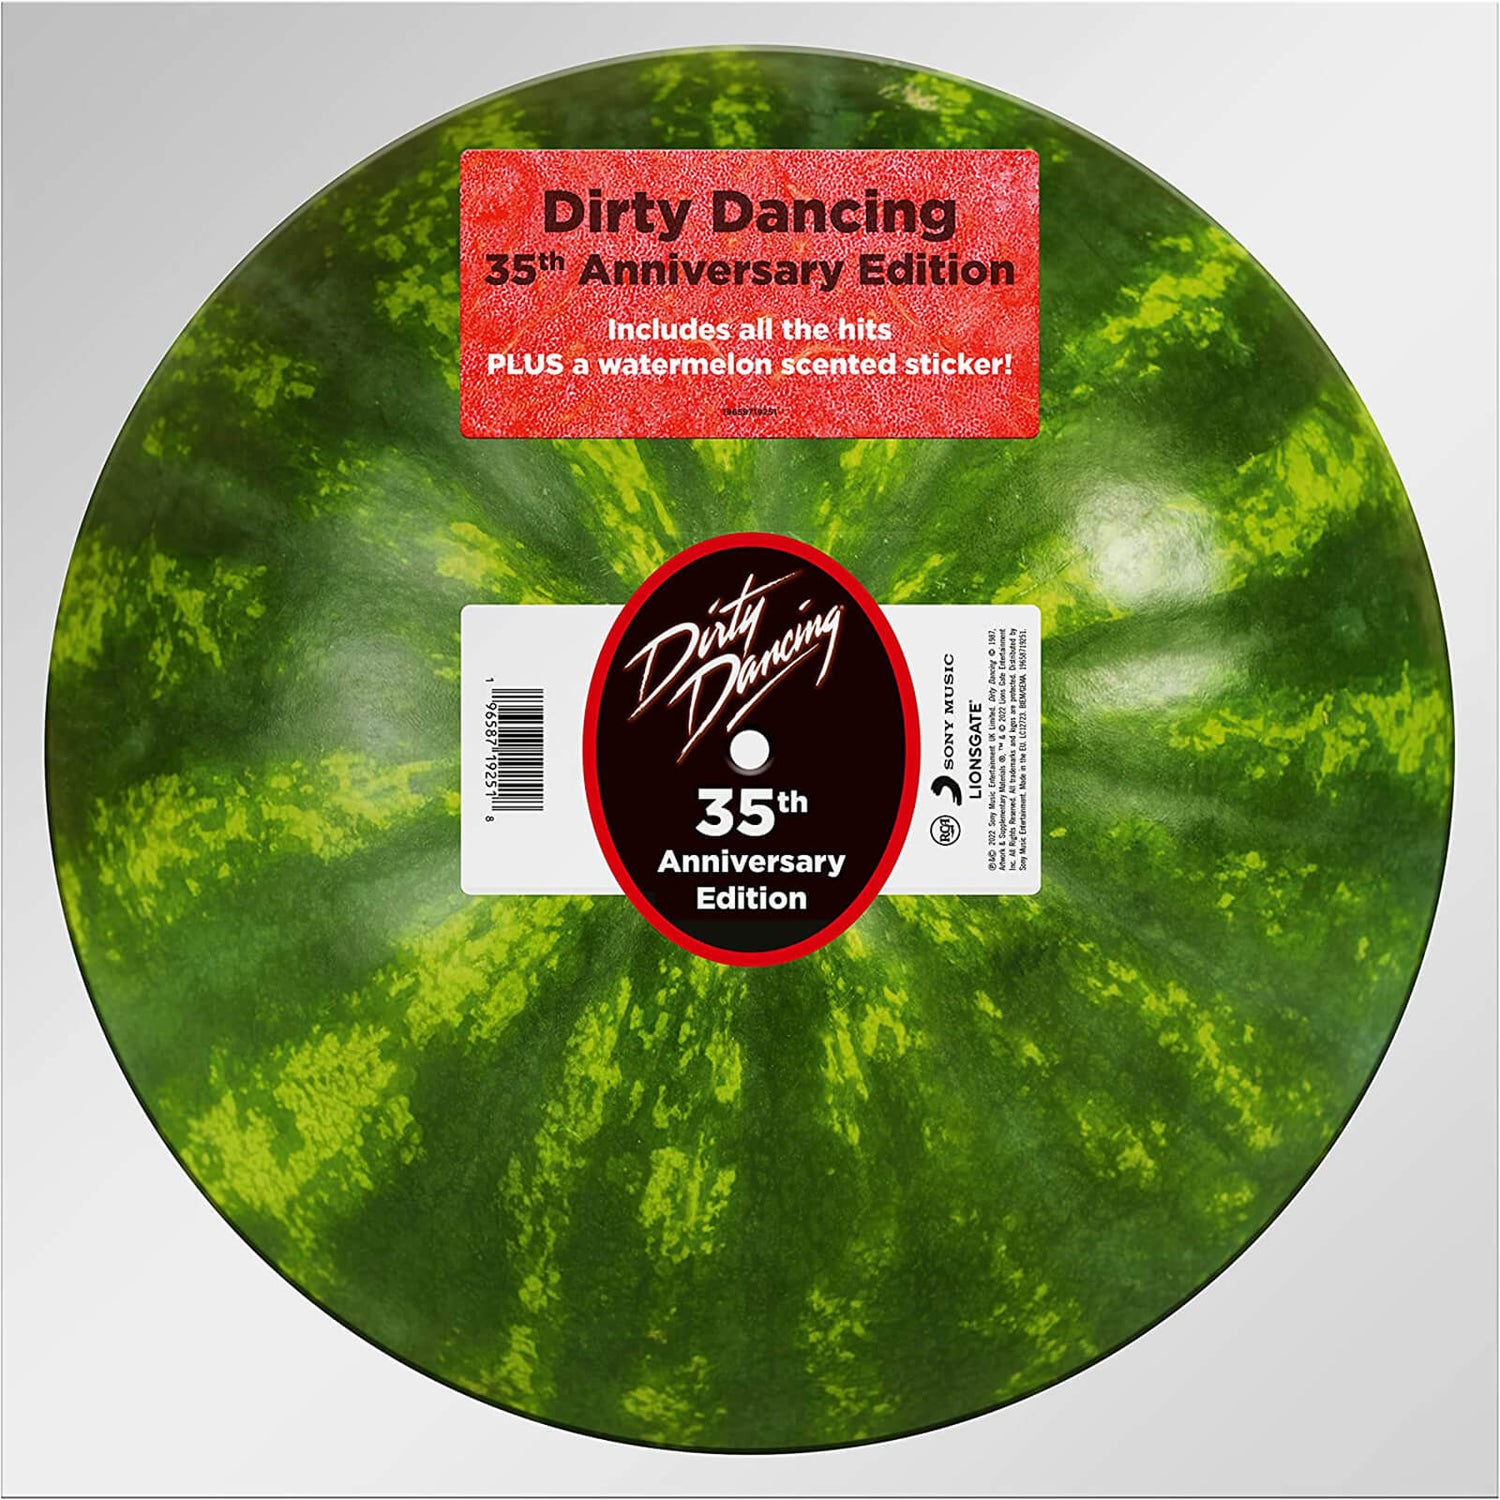 Dirty Dancing (Original Motion Picture Soundtrack) 35th Anniversary Watermelon Picture Disc Vinyl